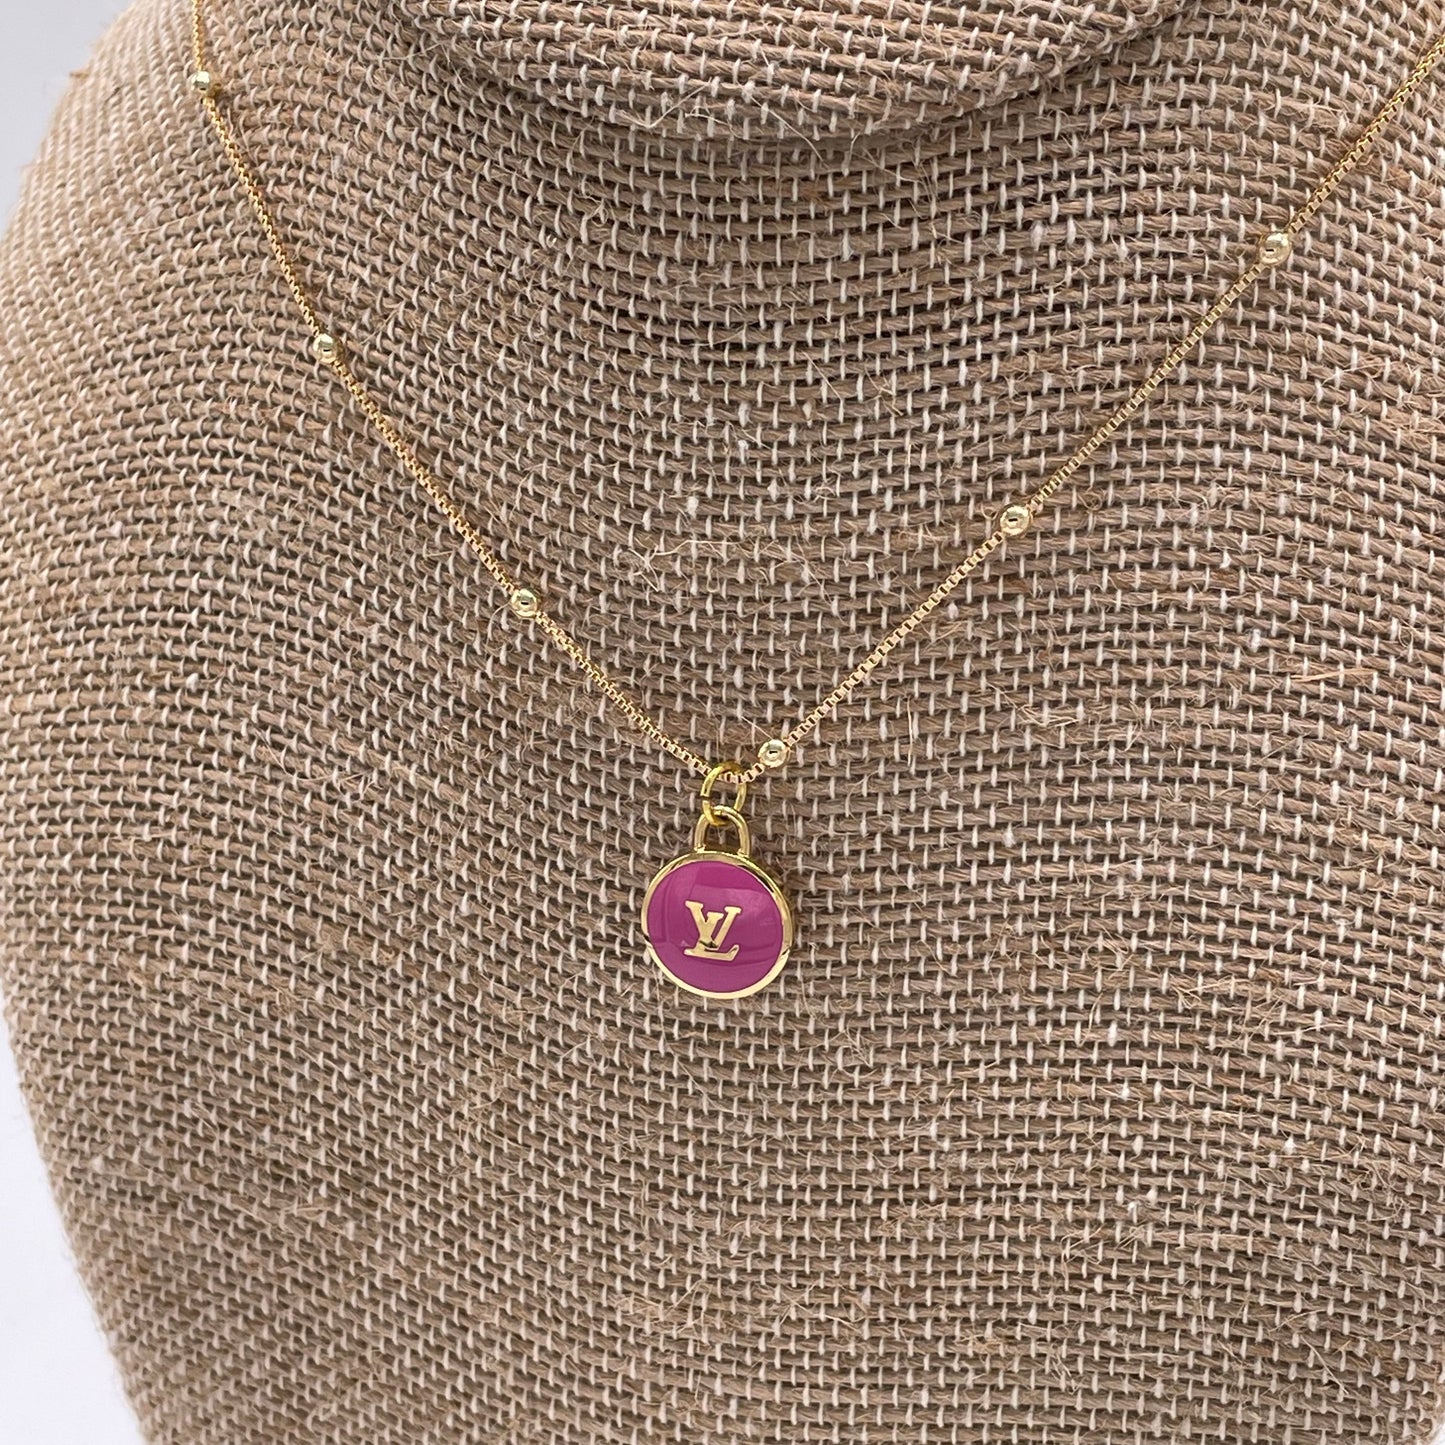 Dainty Louis Vuitton LV Logo Pink Pastilles Charm Worn on Chain as Necklace